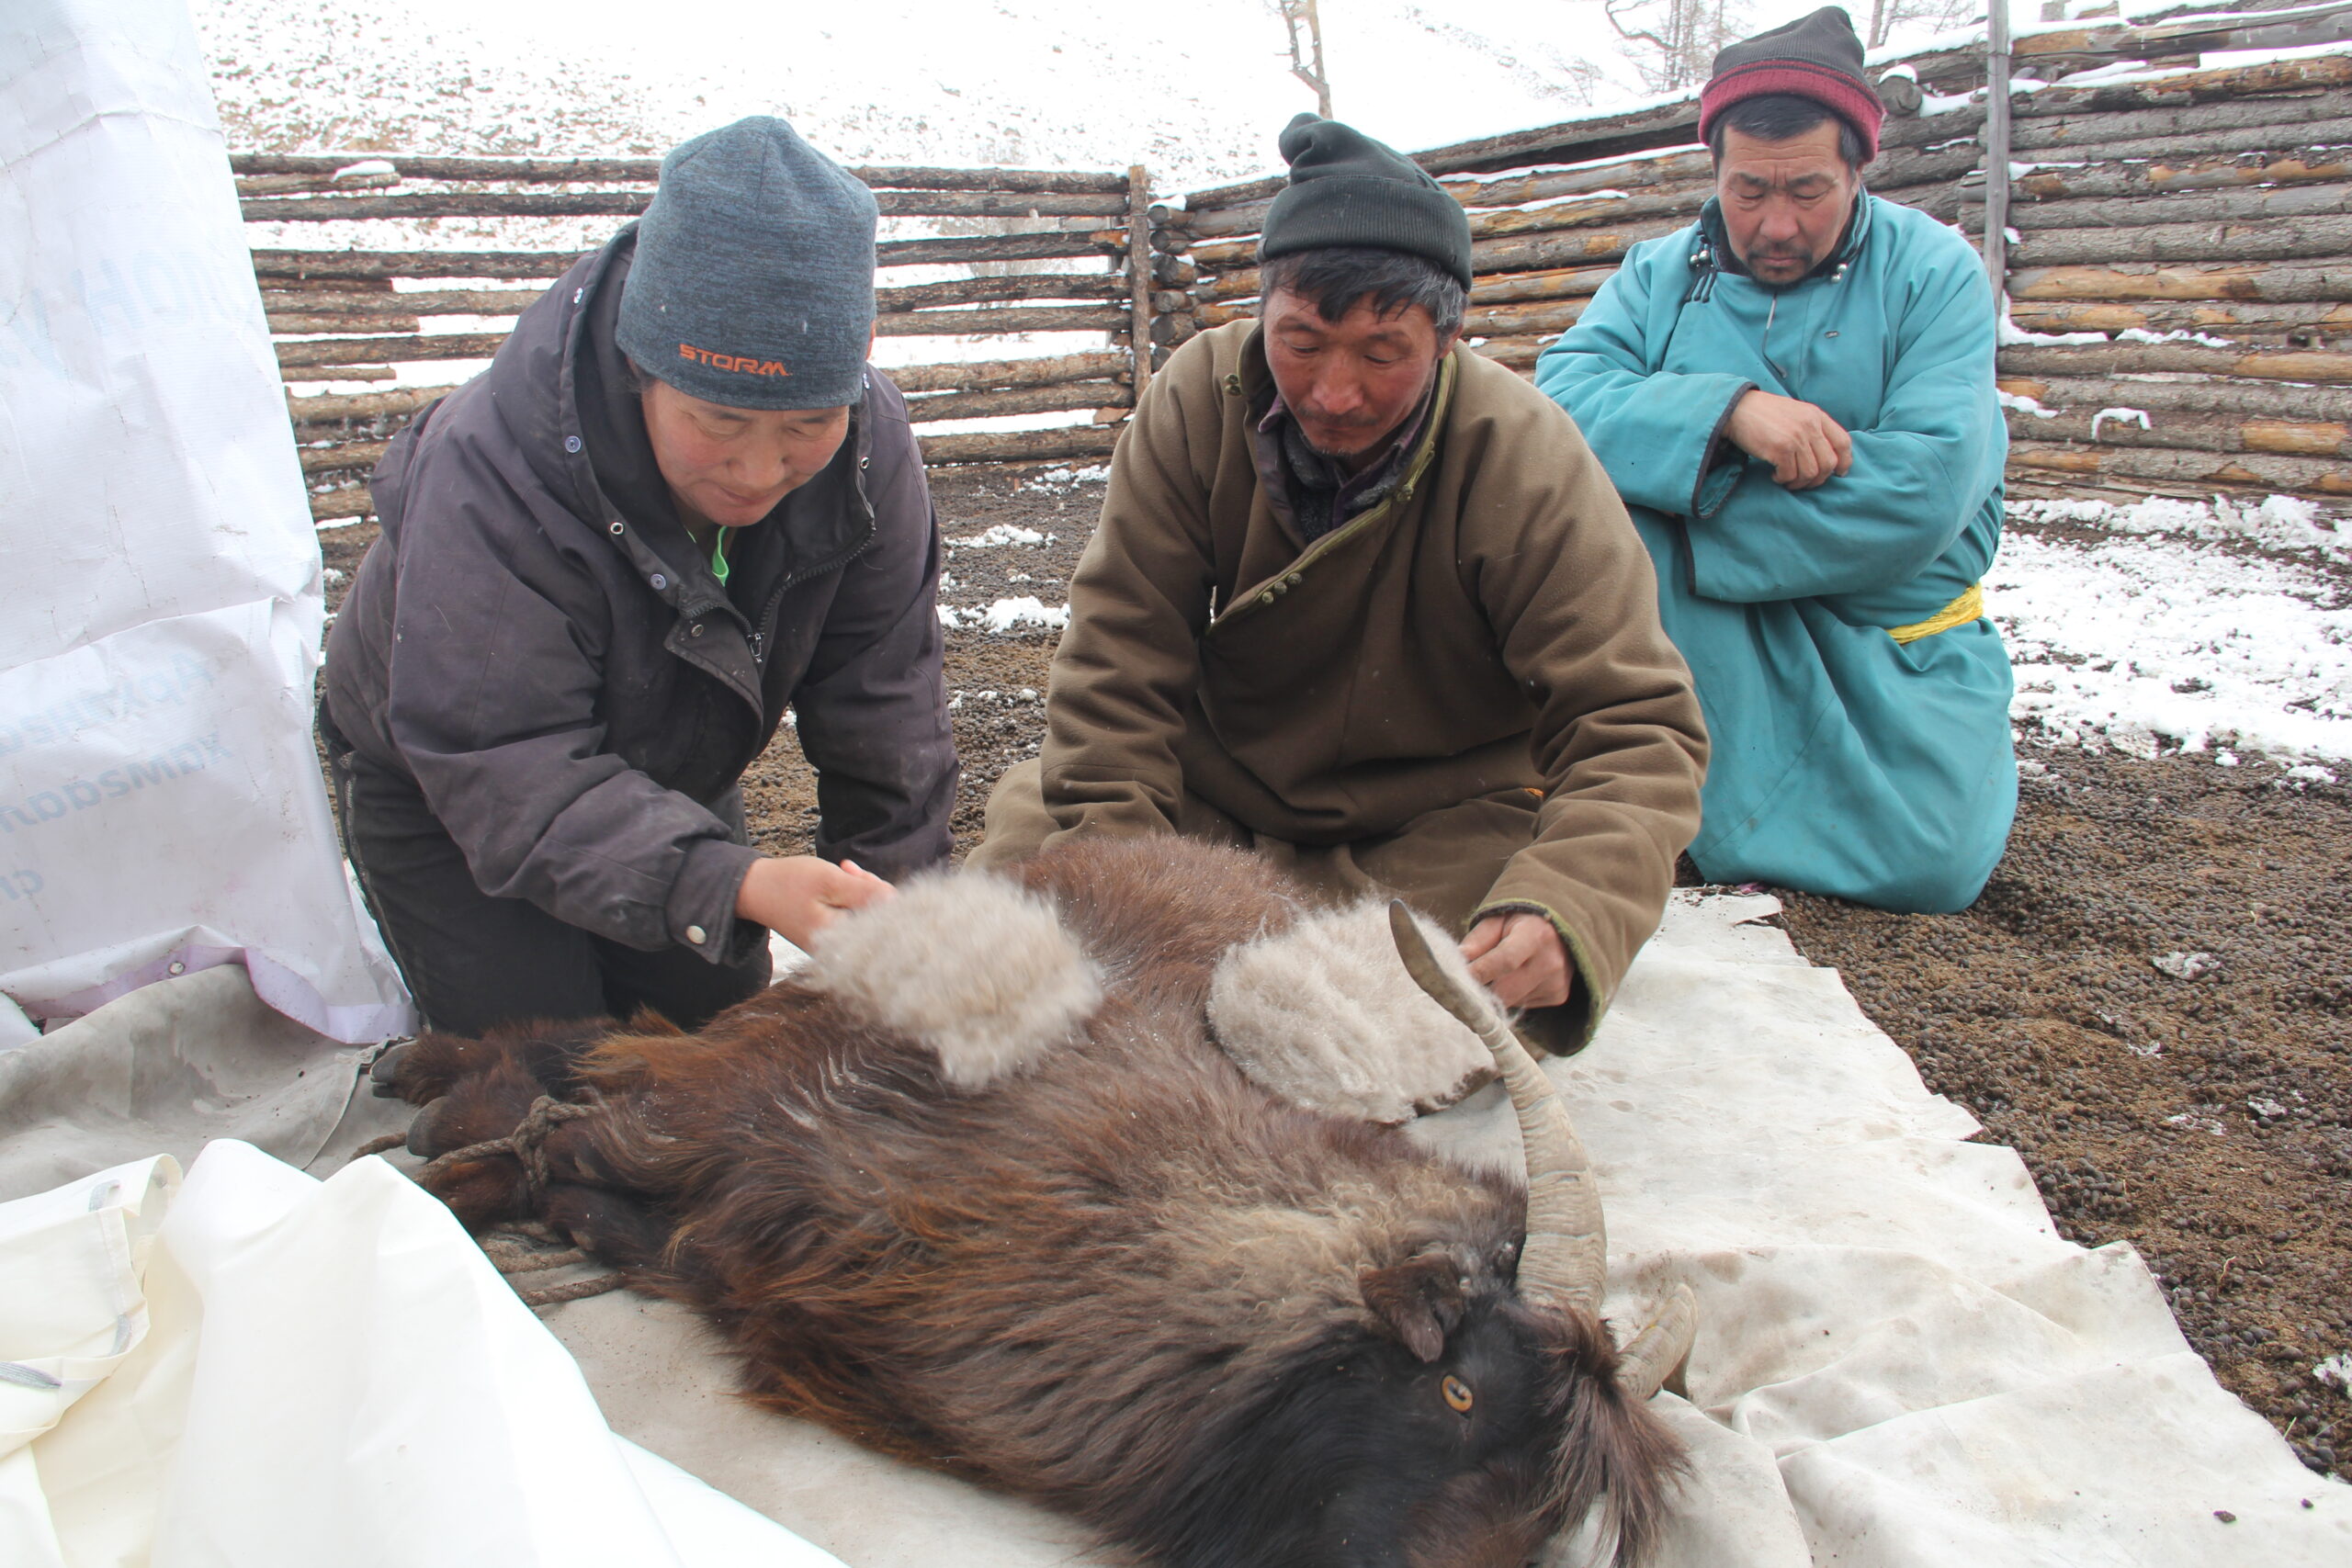 A cashmere goat lying on a sheet. Three men kneeling down to comb the goat.